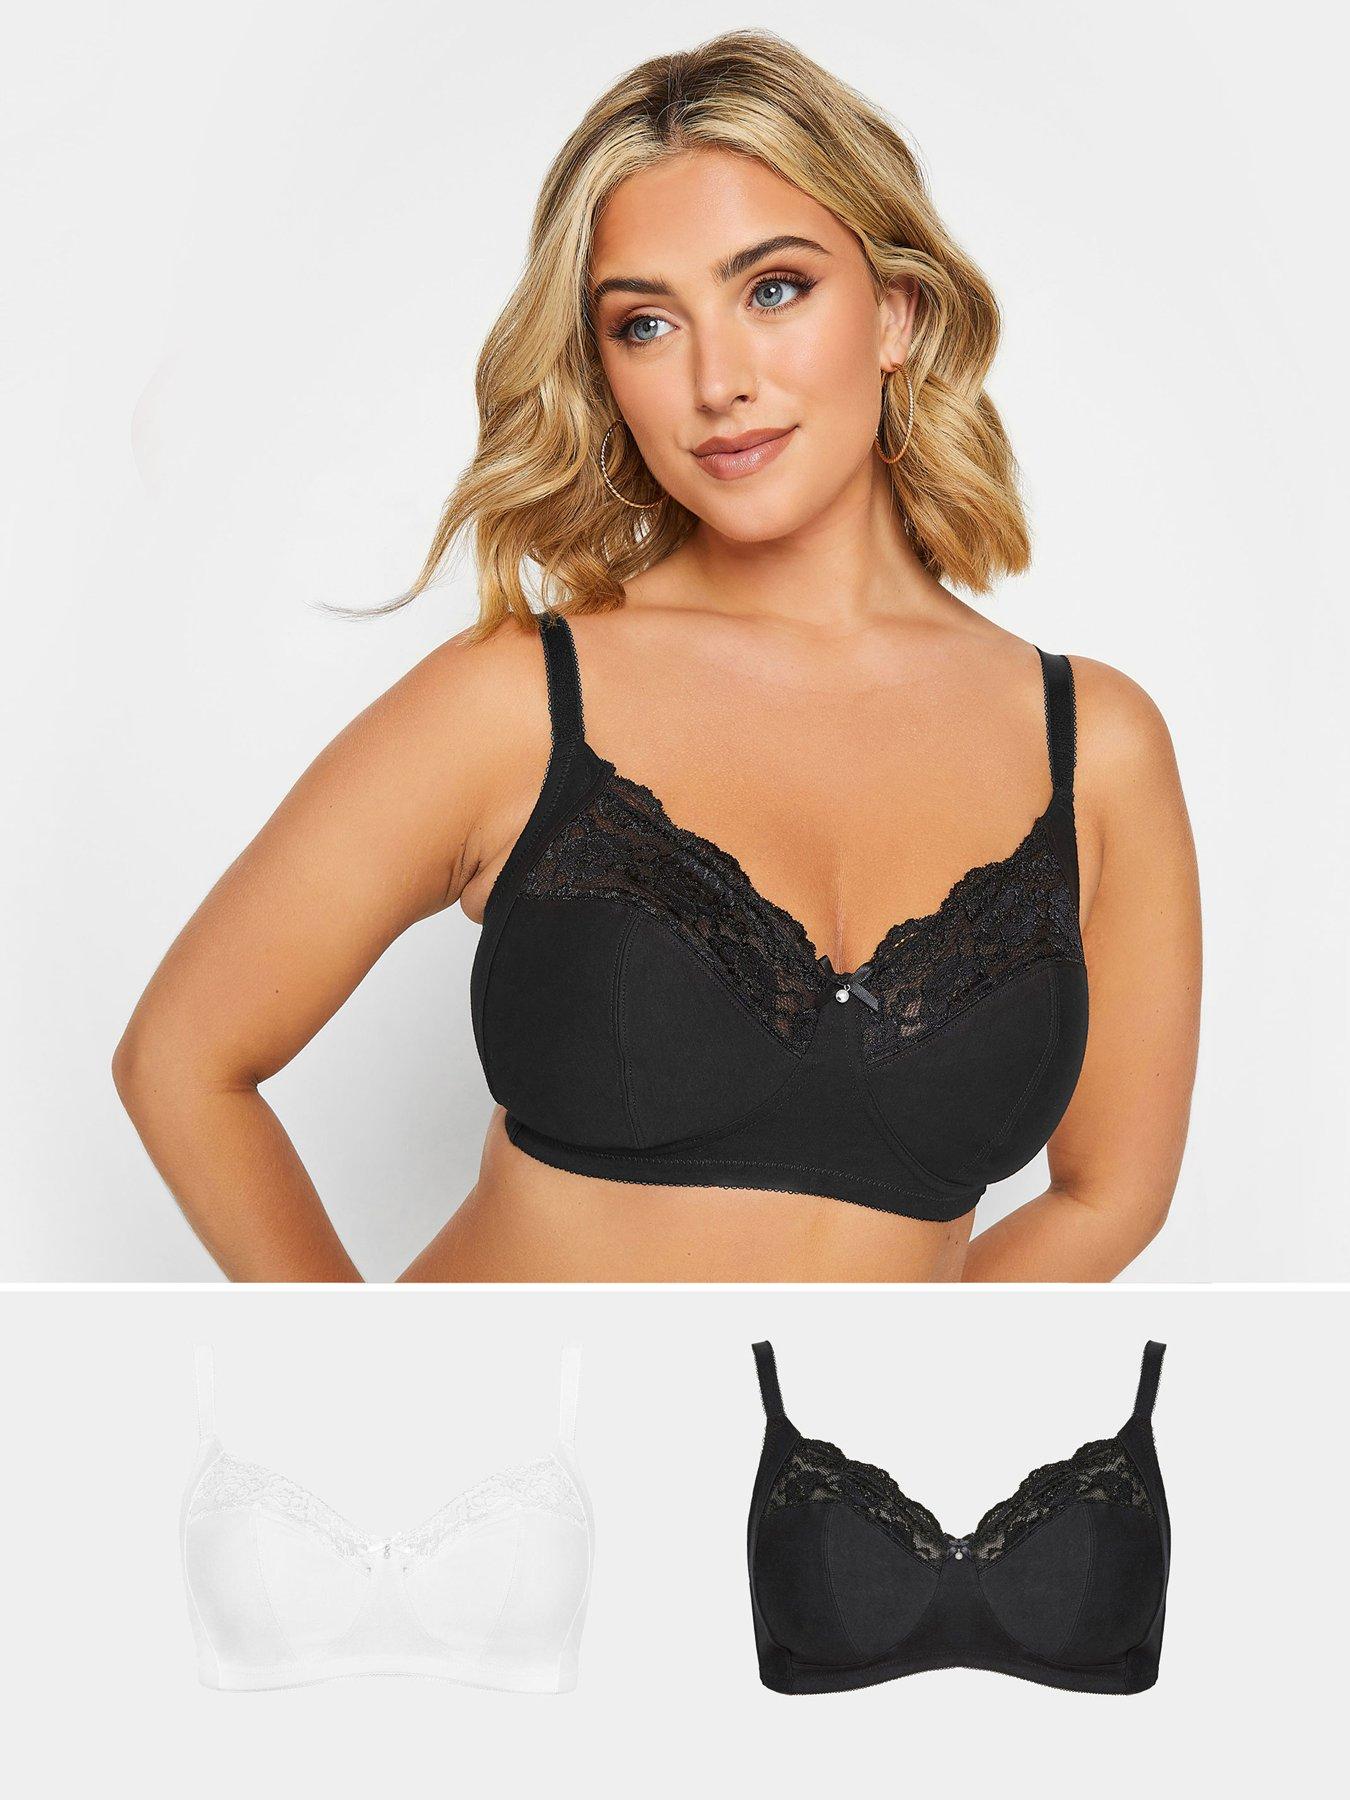 Buy OOLA LINGERIE Lace & Logo Non Wired Soft Bra 44G, Bras